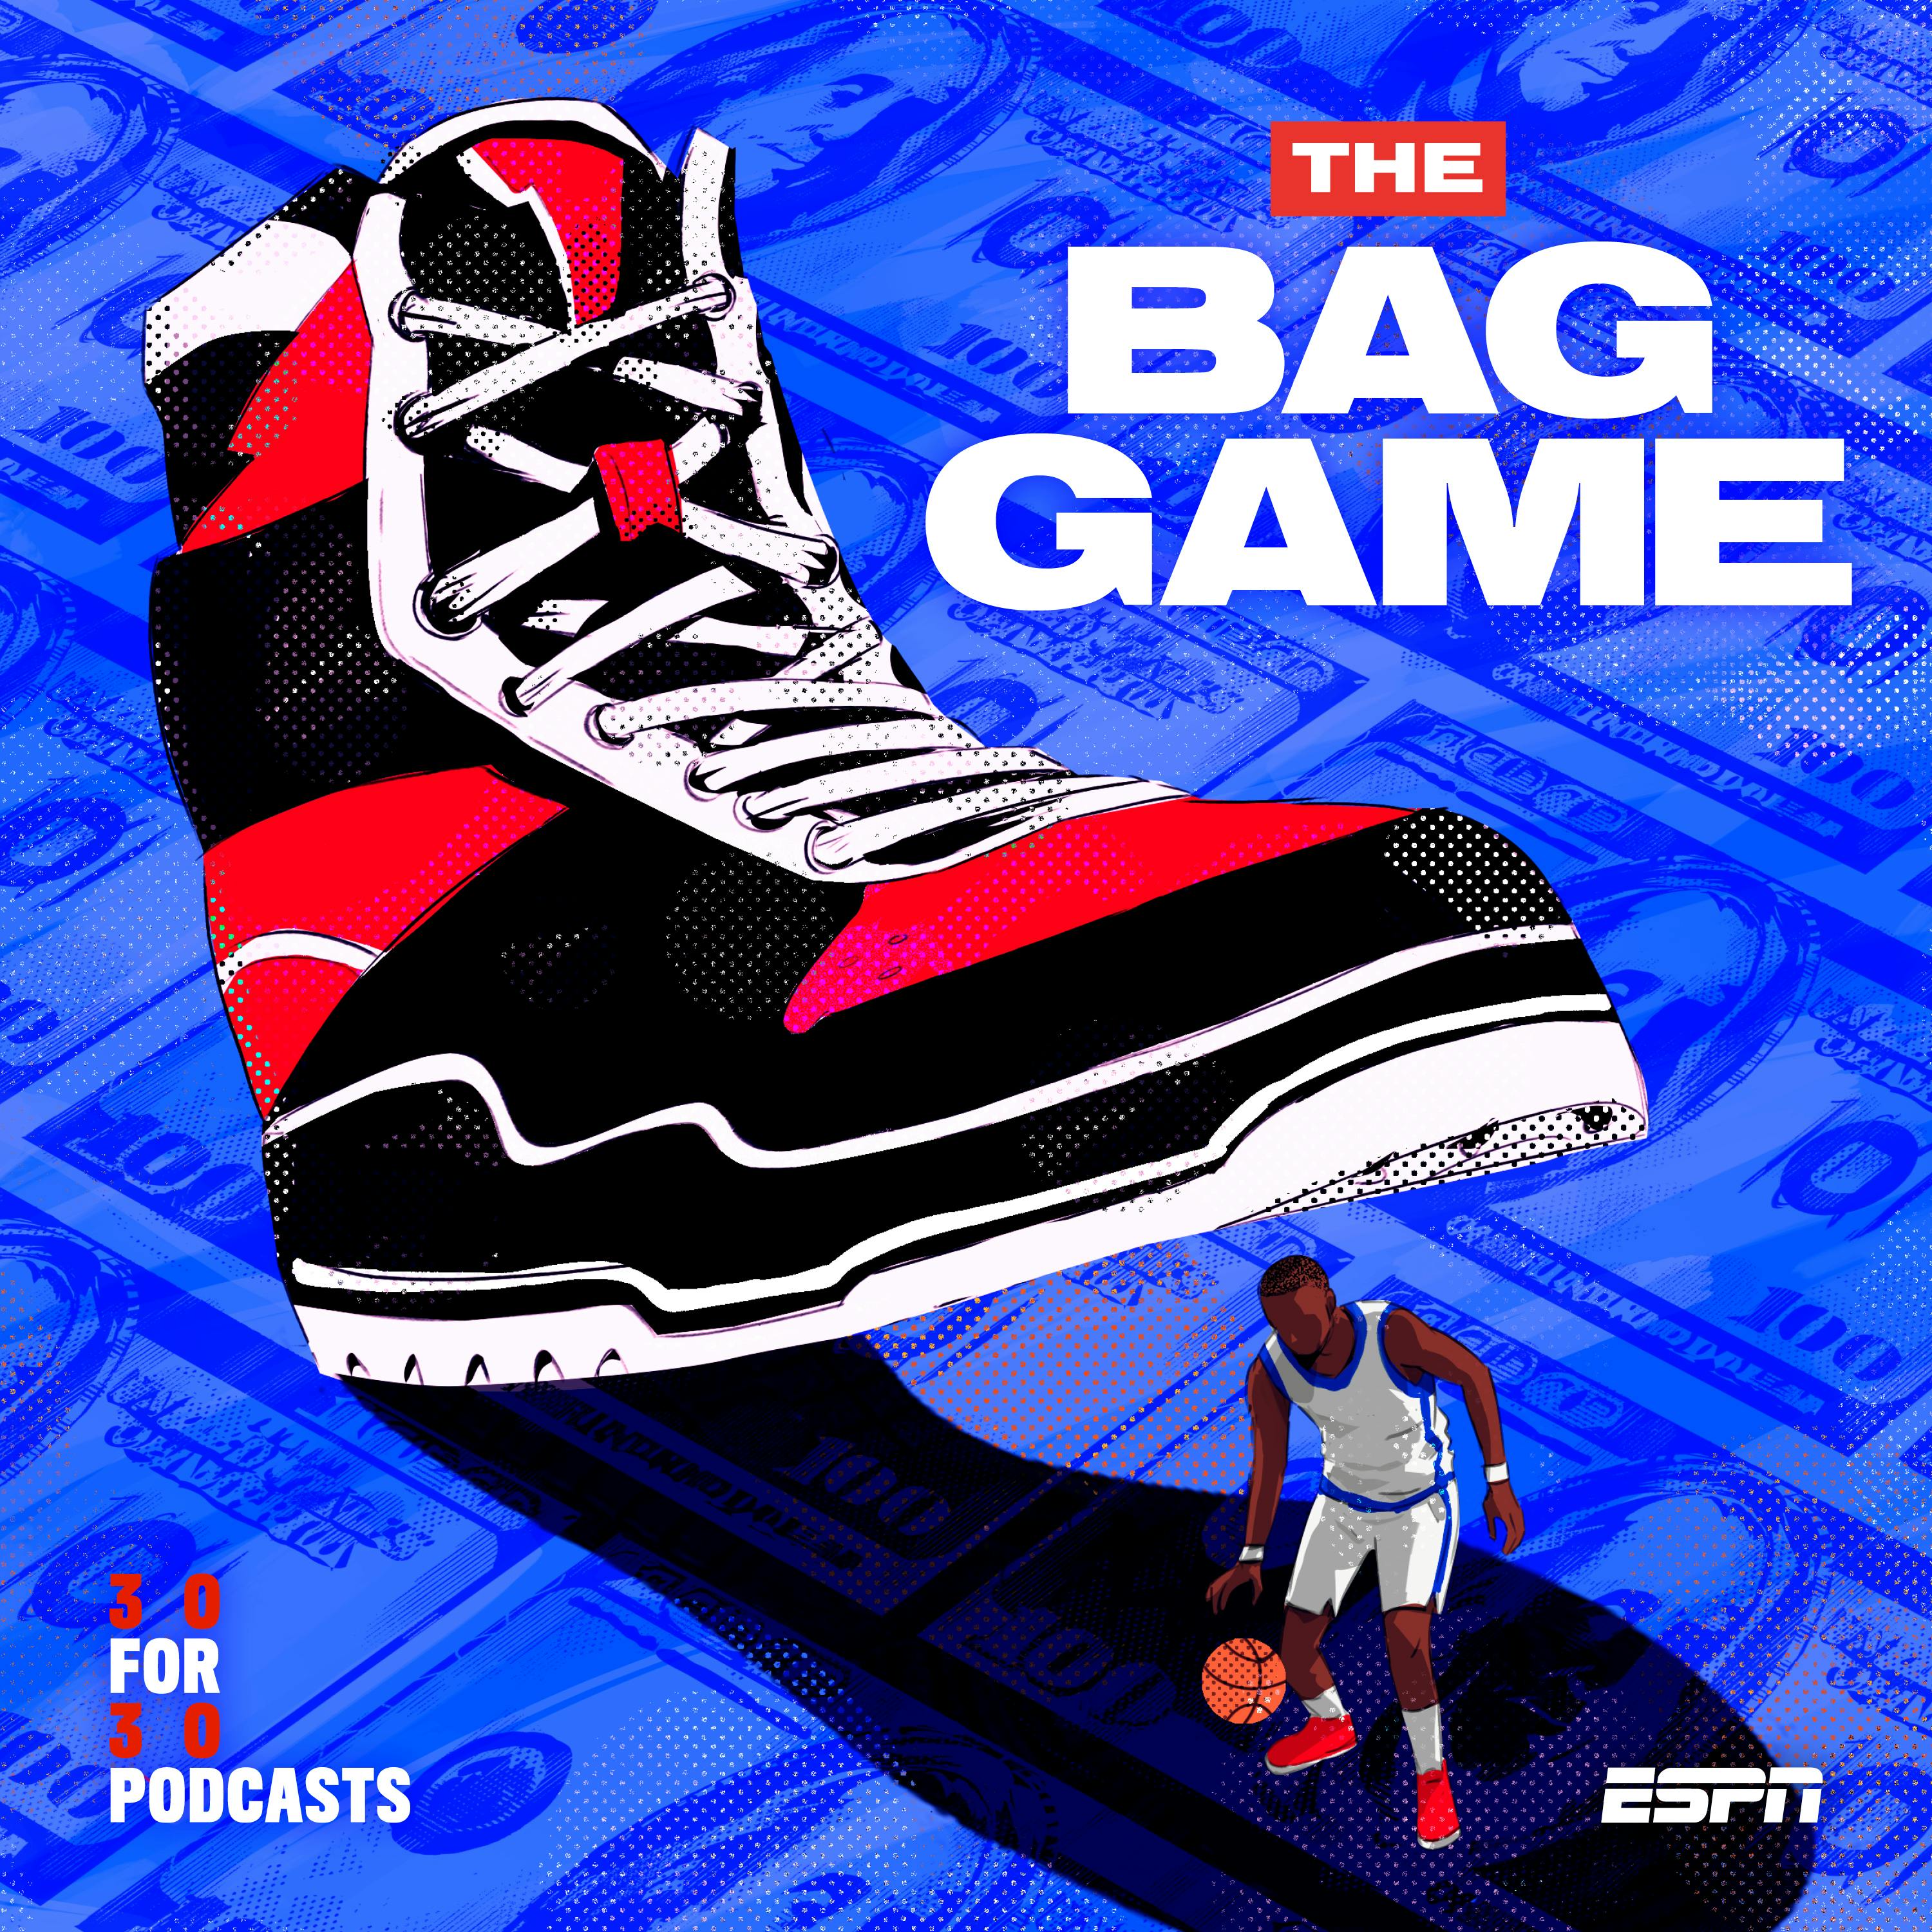 THE BAG GAME Episode 3: The Sting